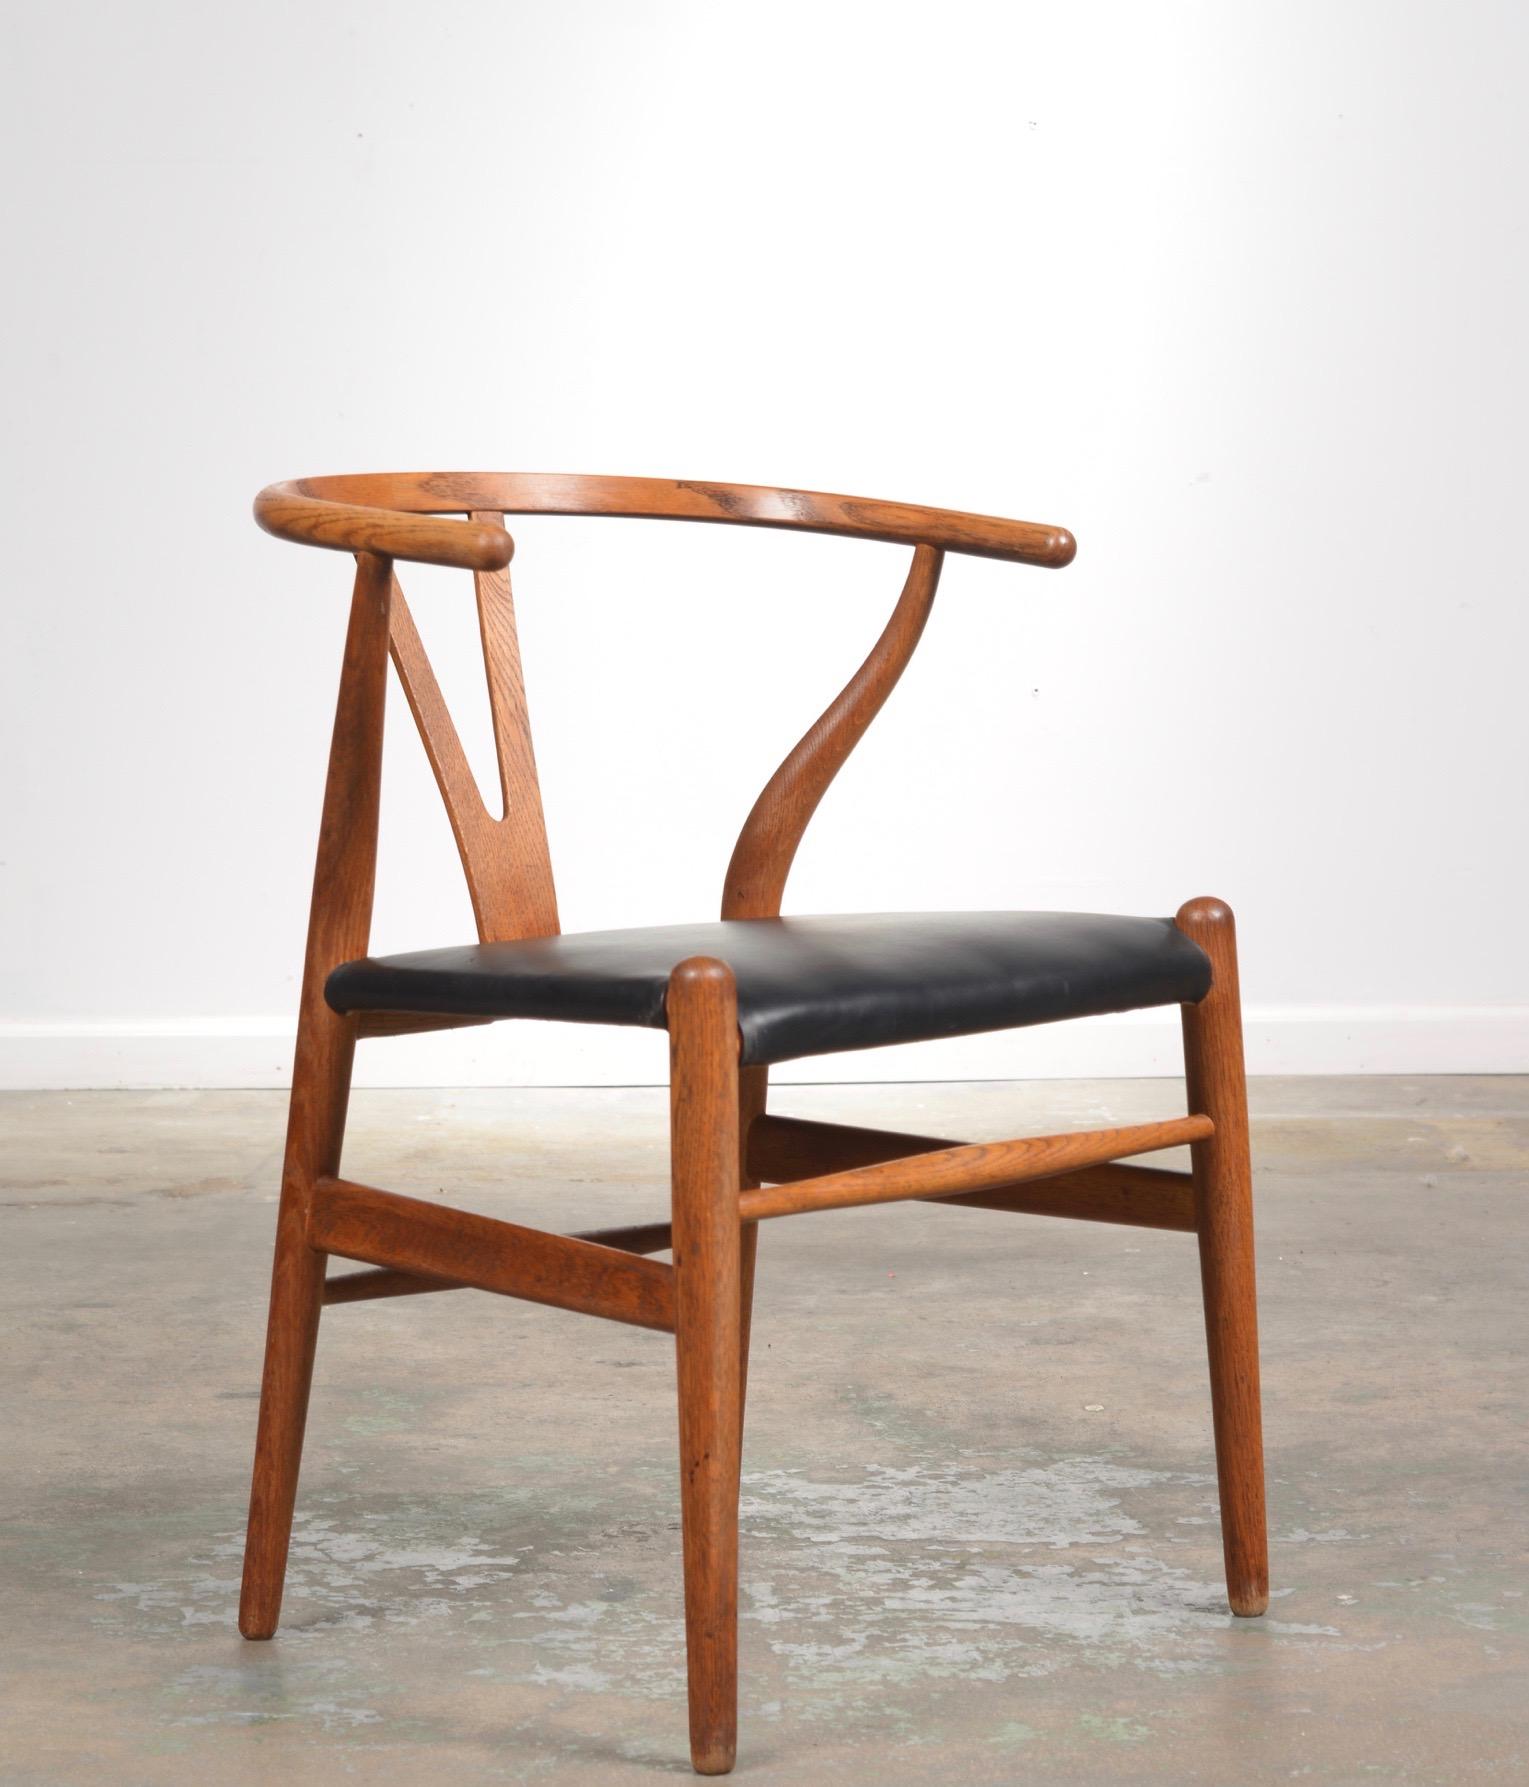 Oiled Oak frame with black leather seat 1st generation Hans Wegner Wishbone chair. A simple, light and appealing shape, this is the most sold chair produced by Carl Hansen and Søn.